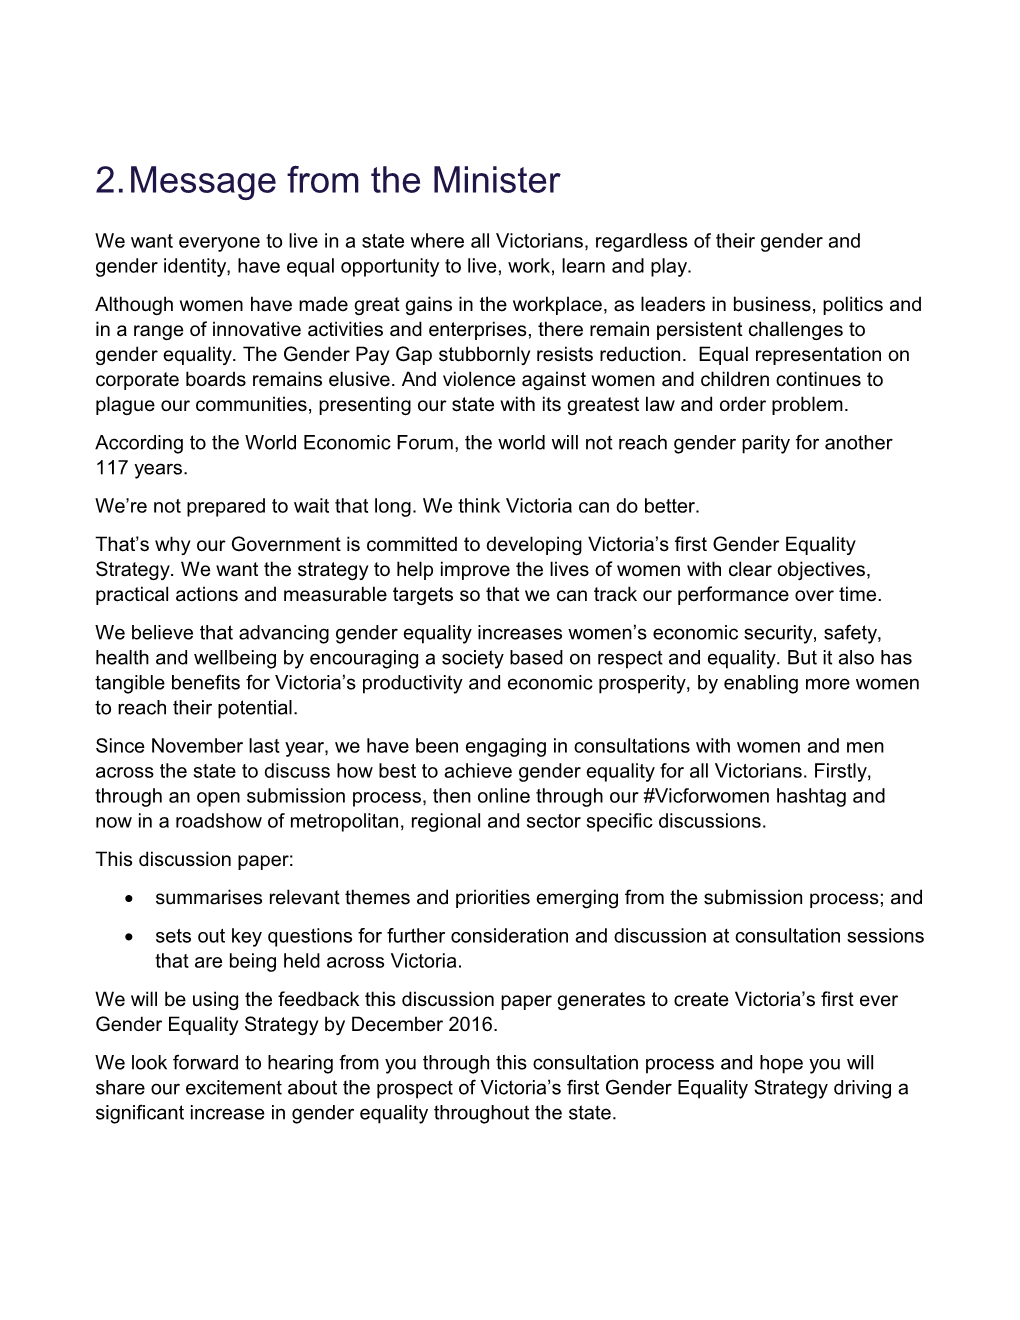 Message from the Minister